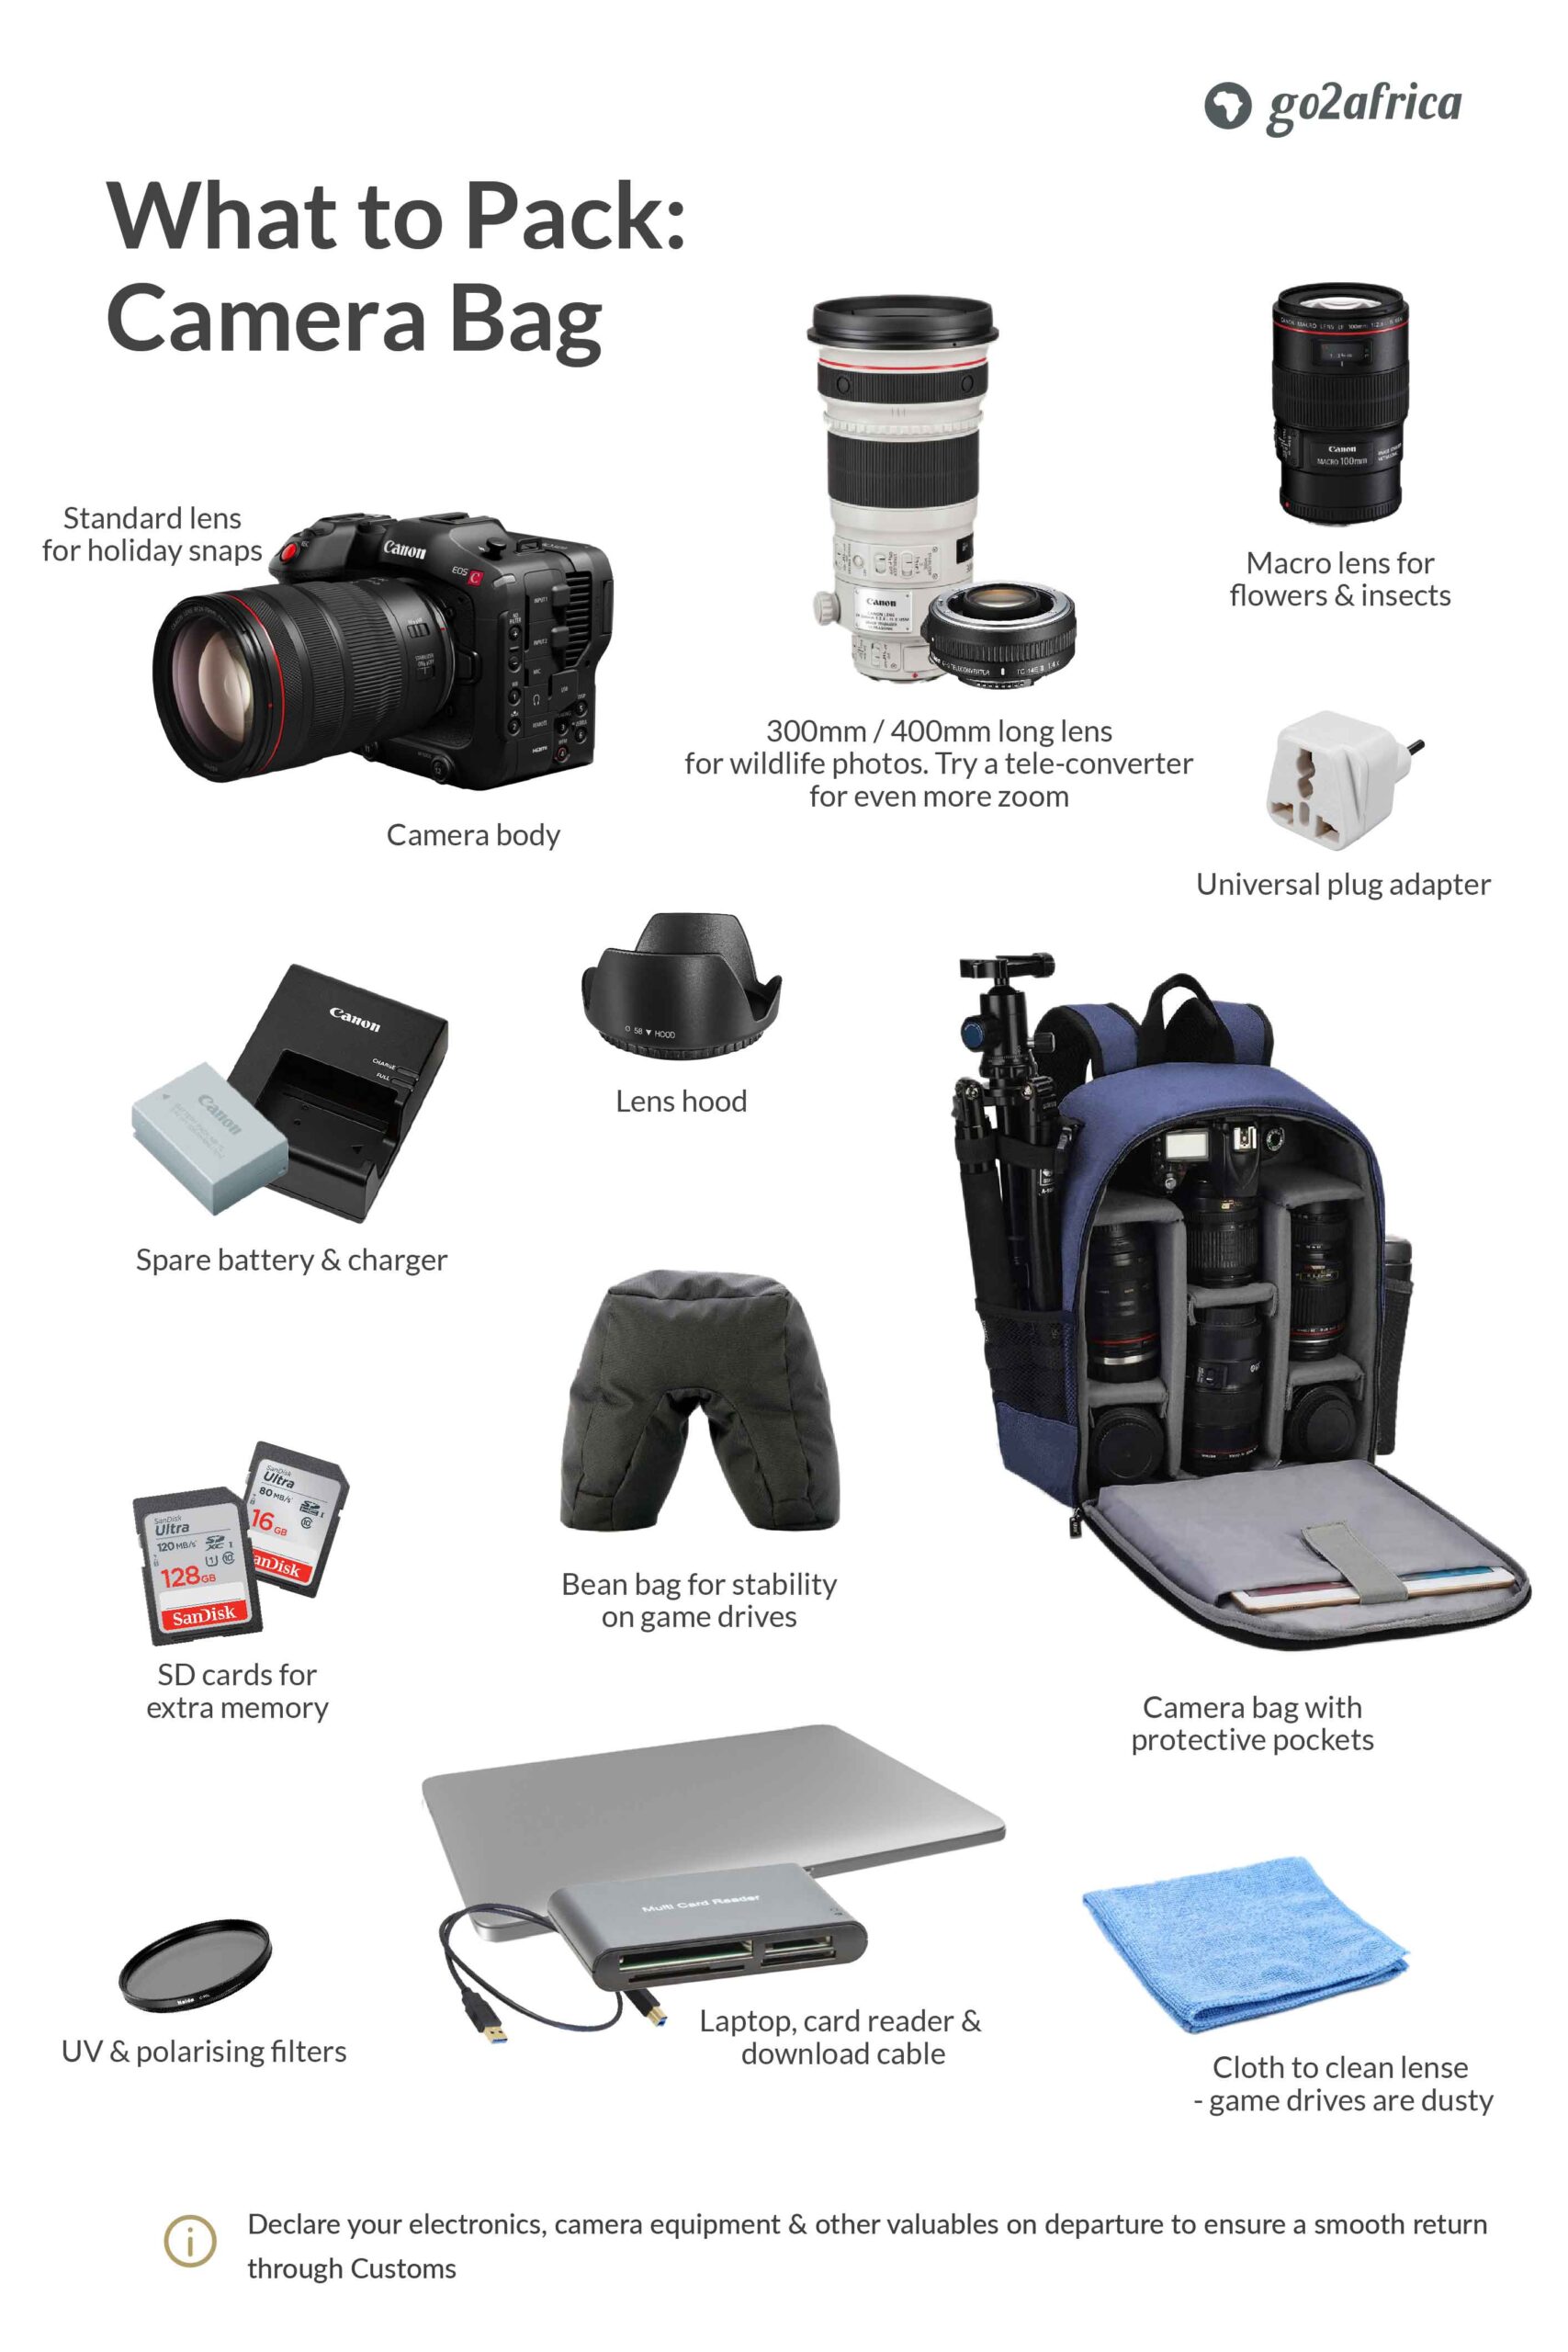 Resized-G2A-What-to-Pack-Camera-Bag-2021